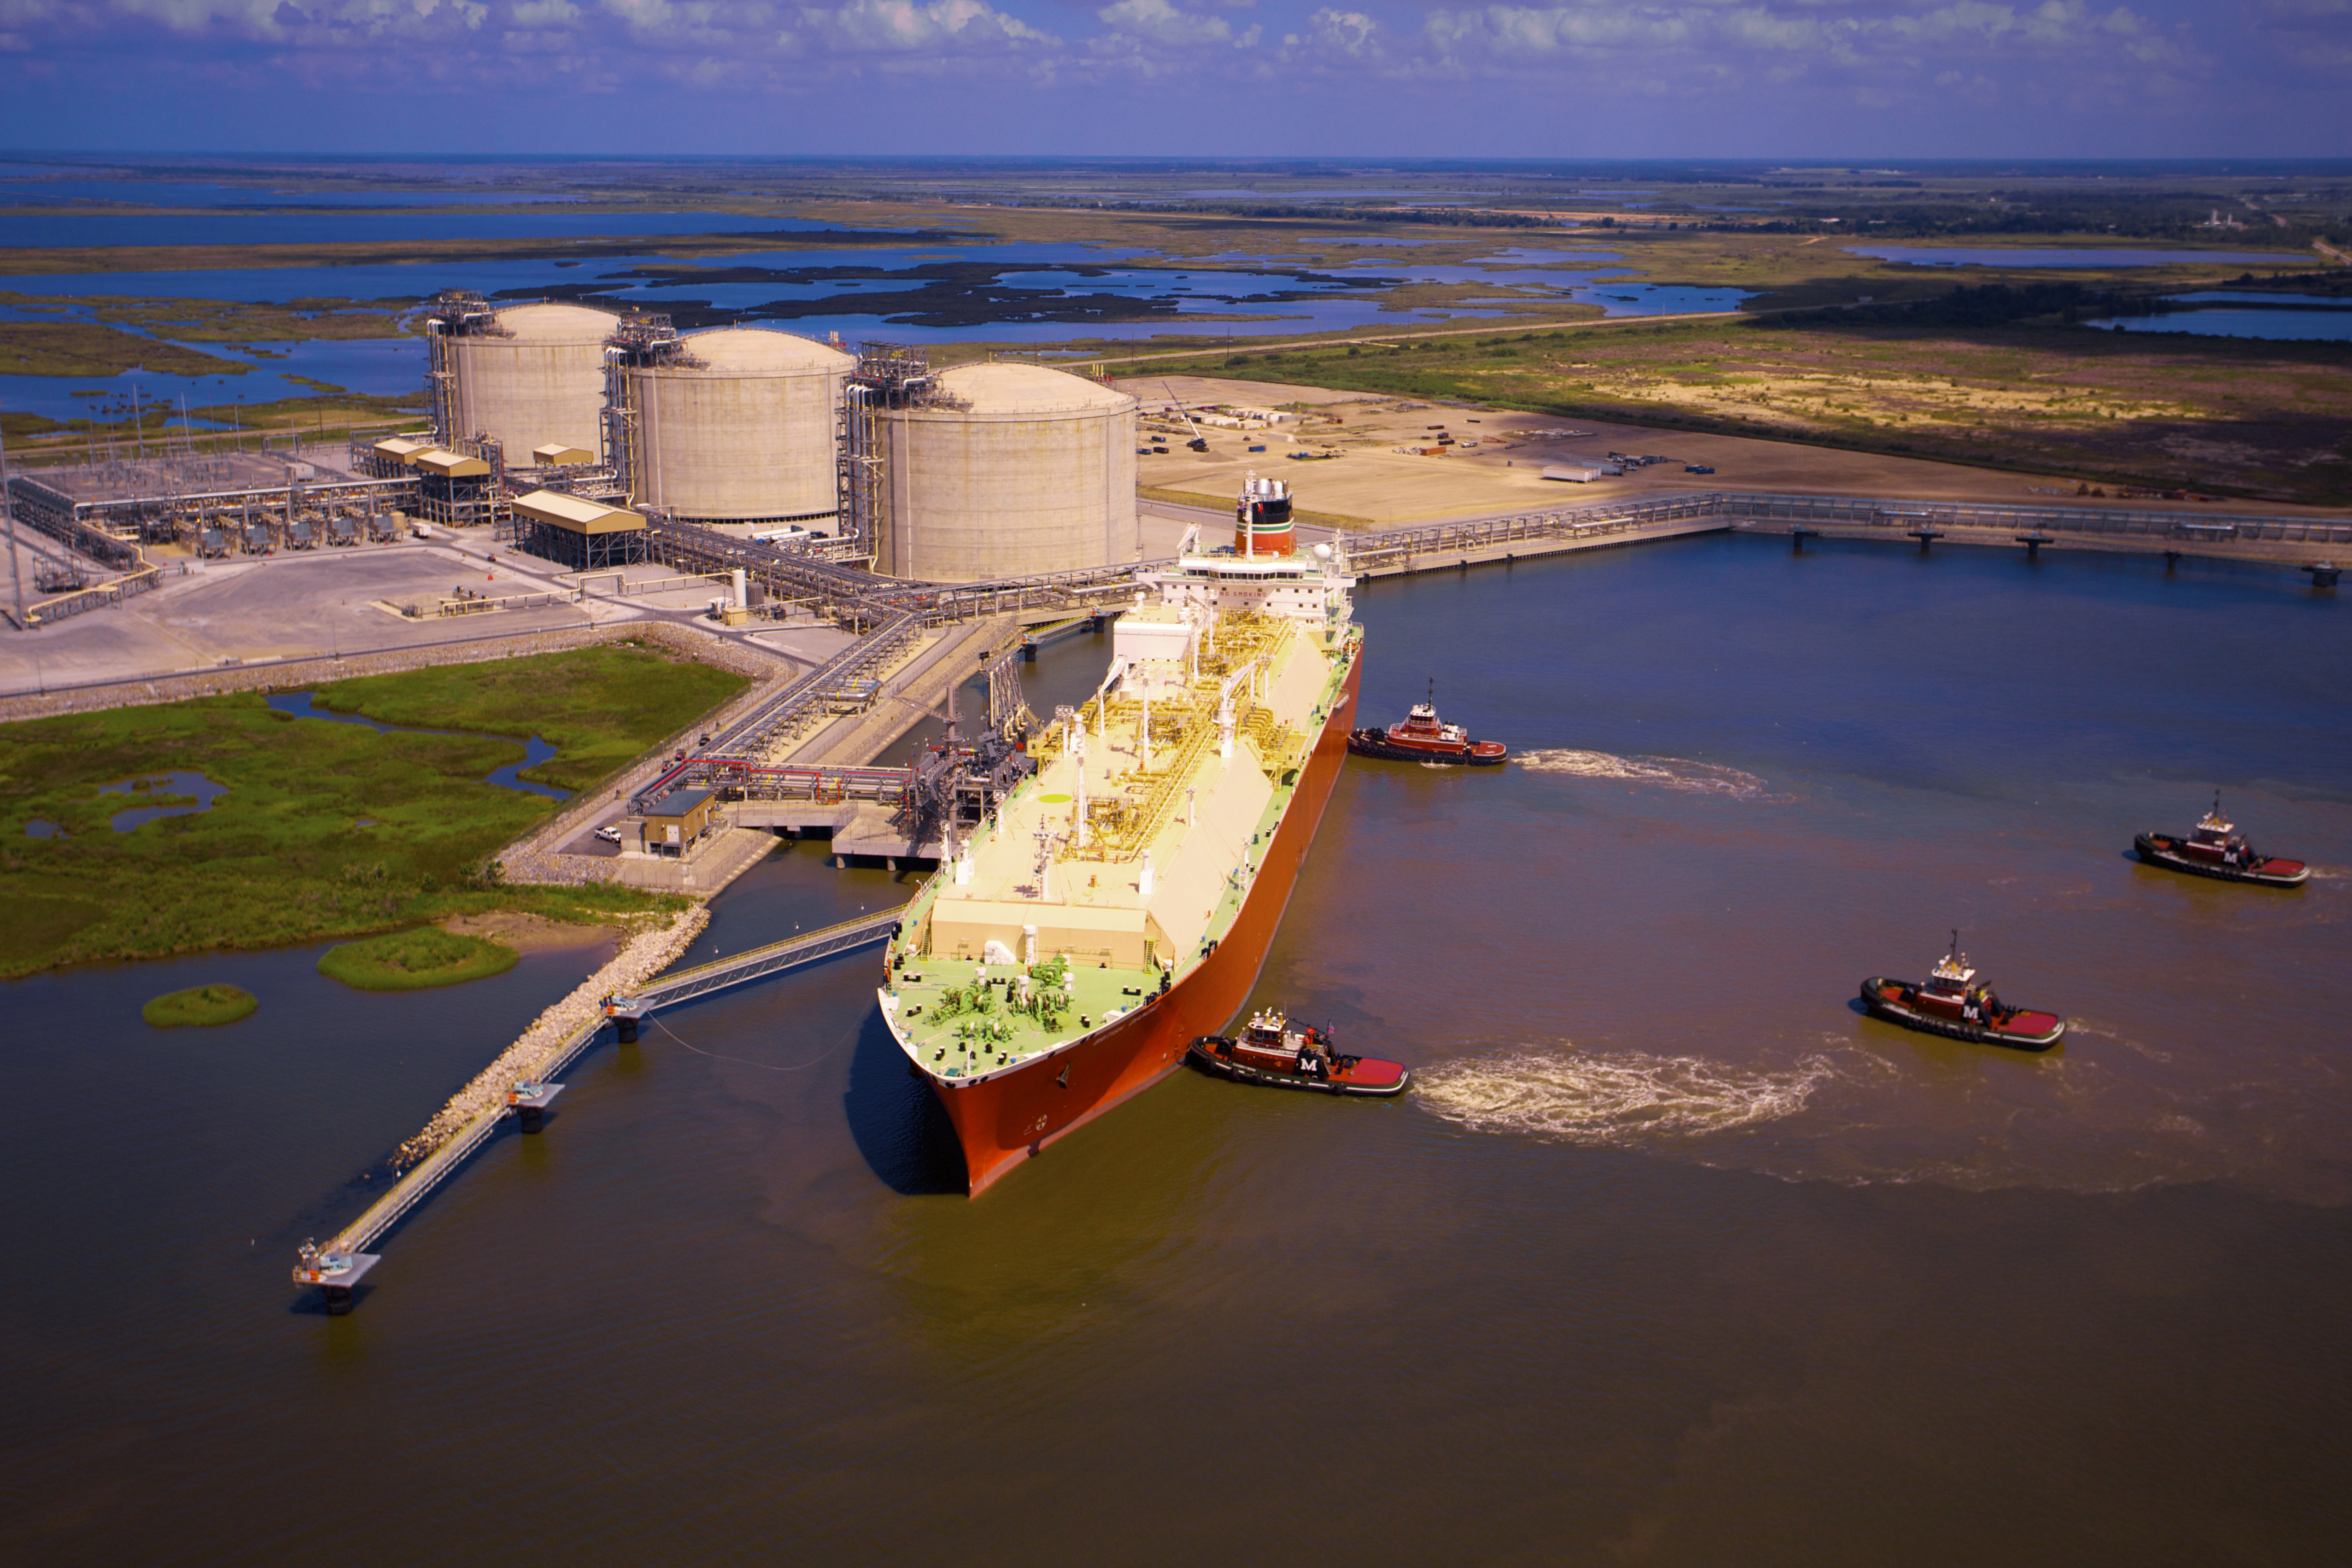 The Cameron LNG regasification terminal sits on an industrial-zoned site along the Calcasieu Channel in Hackberry, La., about 18 miles from the Gulf of Mexico and within 35 miles of five major interstate pipelines. (Source: Lonnie Duka/Sempra LNG)